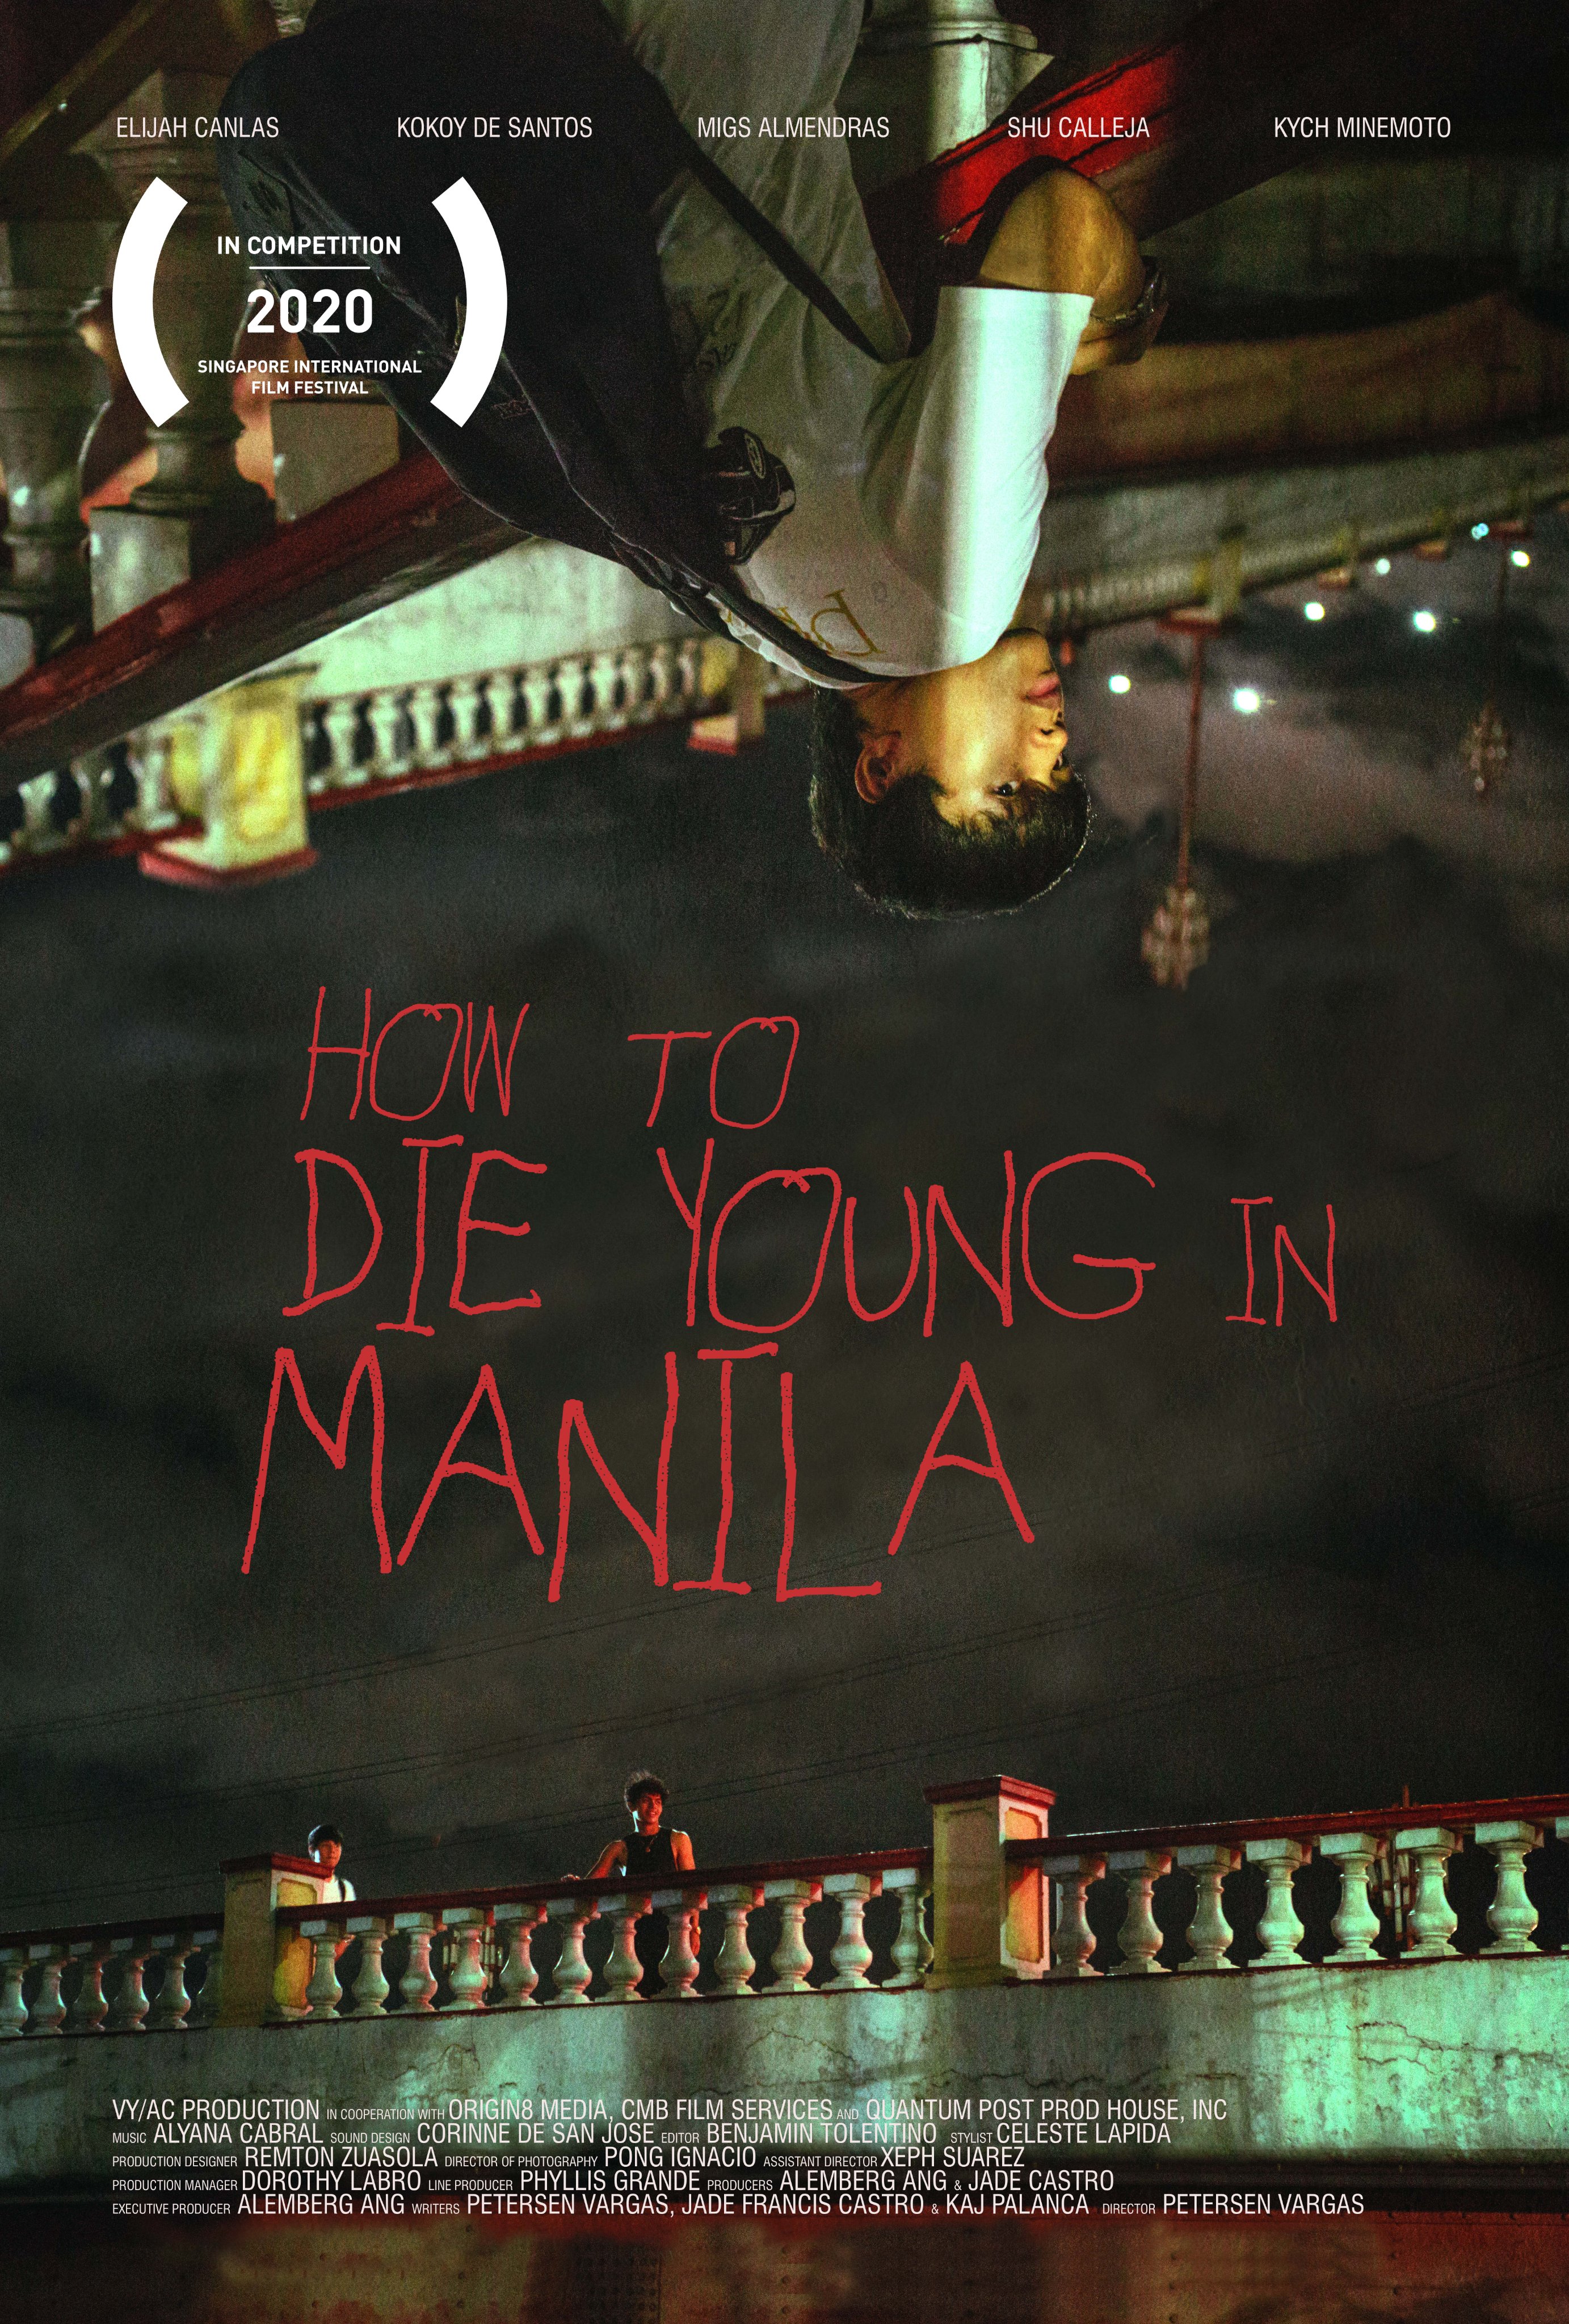 How to Die Young in Manila (2020) Screenshot 4